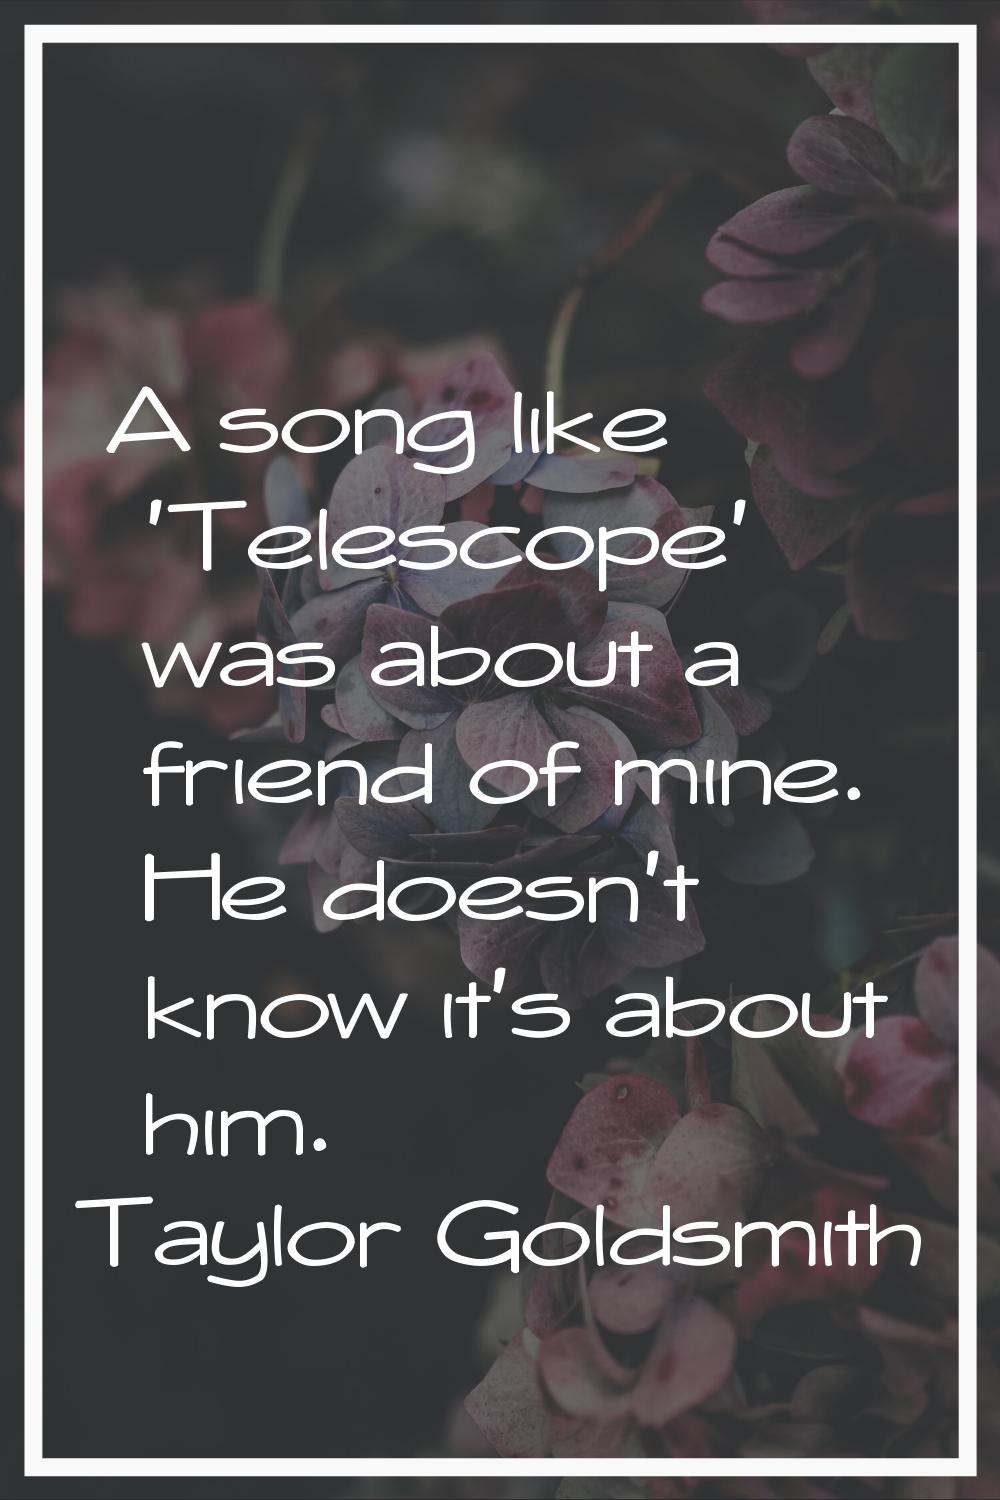 A song like 'Telescope' was about a friend of mine. He doesn't know it's about him.